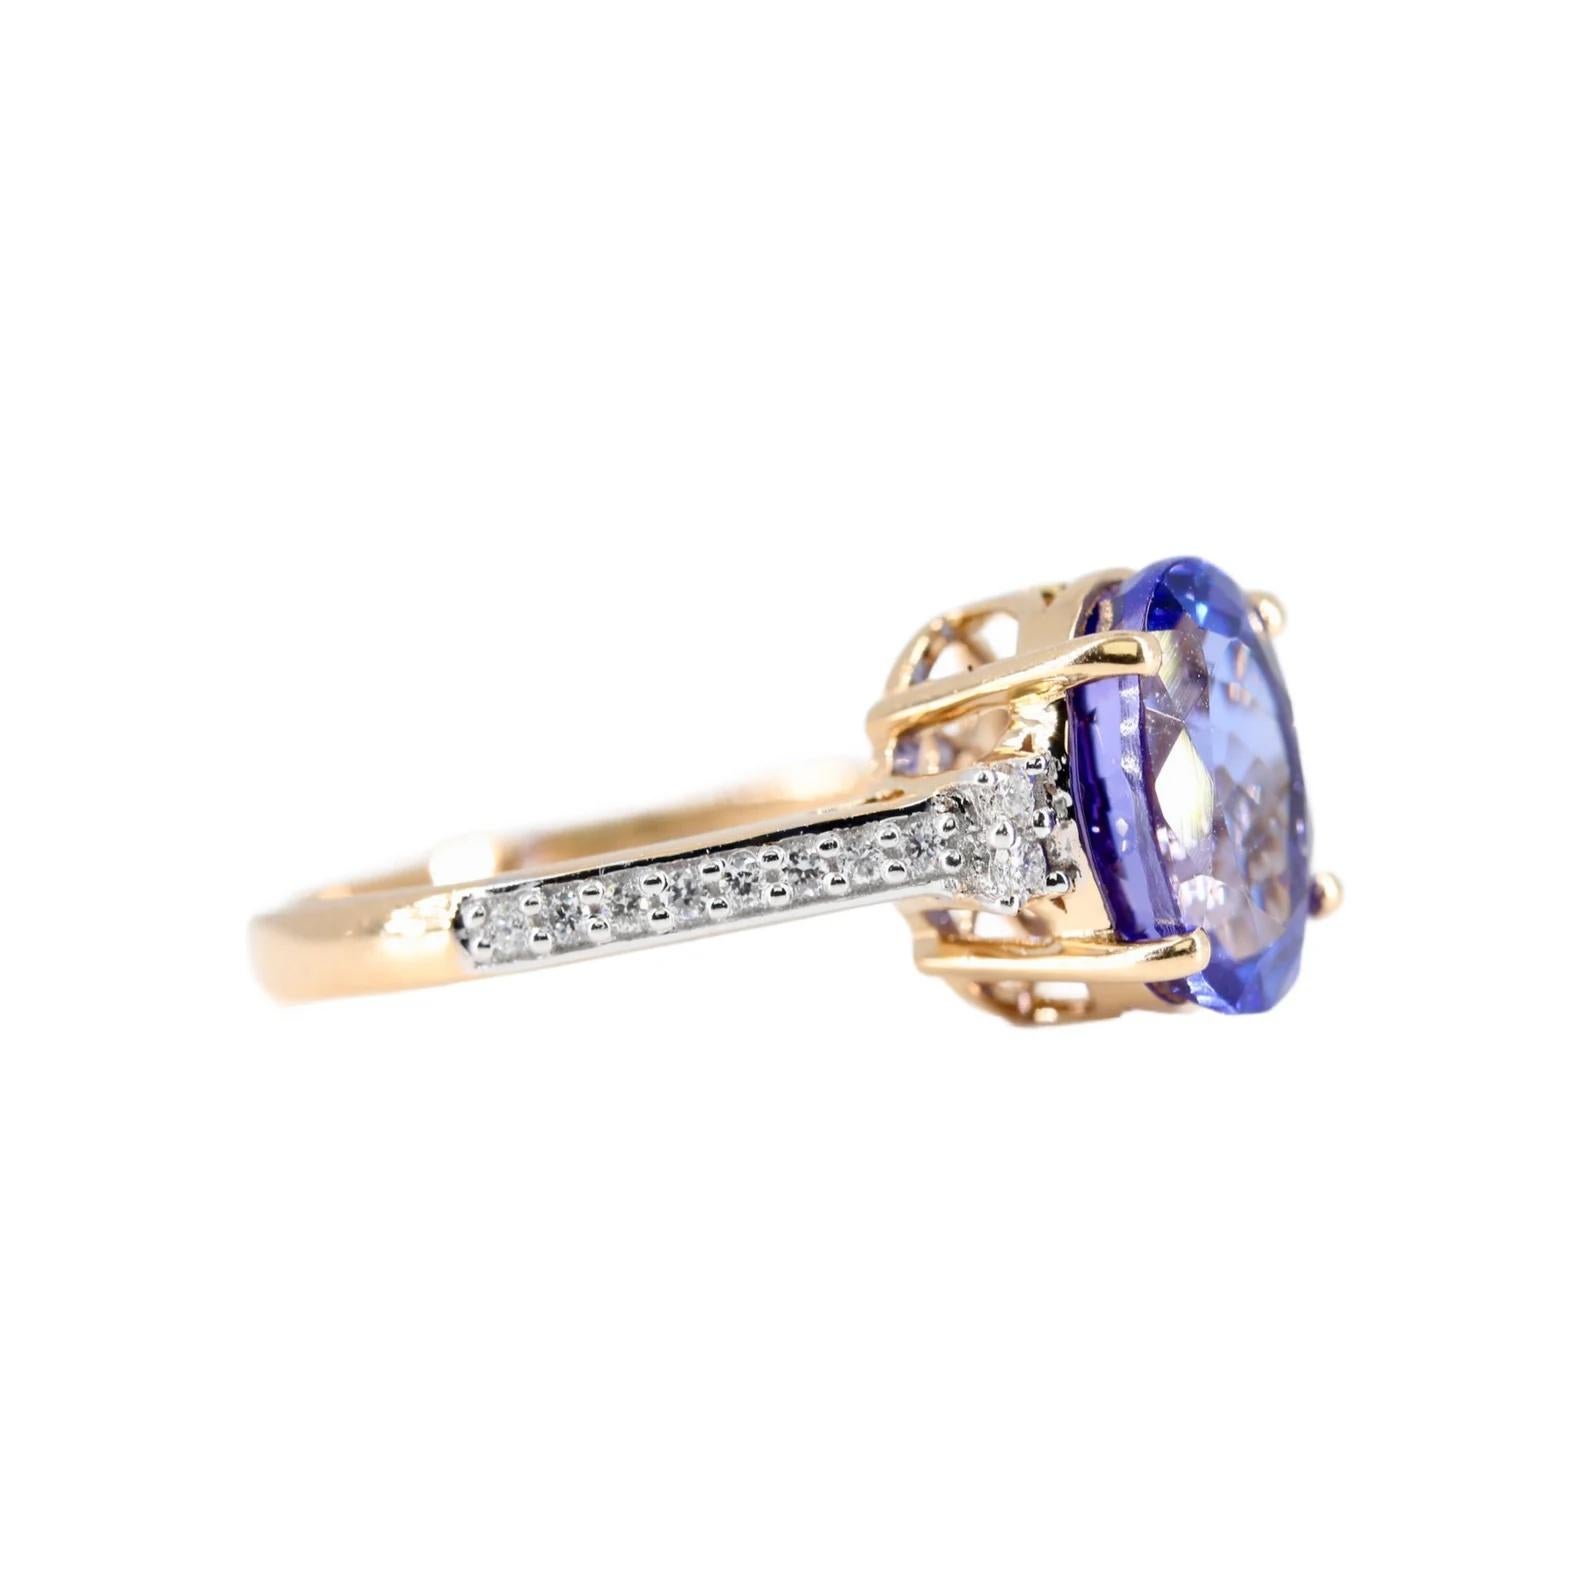 A luxurious tanzanite, and diamond ring in 18 karat yellow gold. Centered by a 3.80 carat oval cut tanzanite of beautiful vivid color. Accented with twenty pave set diamond of 0.24ctw with H color and VS2 clarity.

Hallmarked as 18 karat